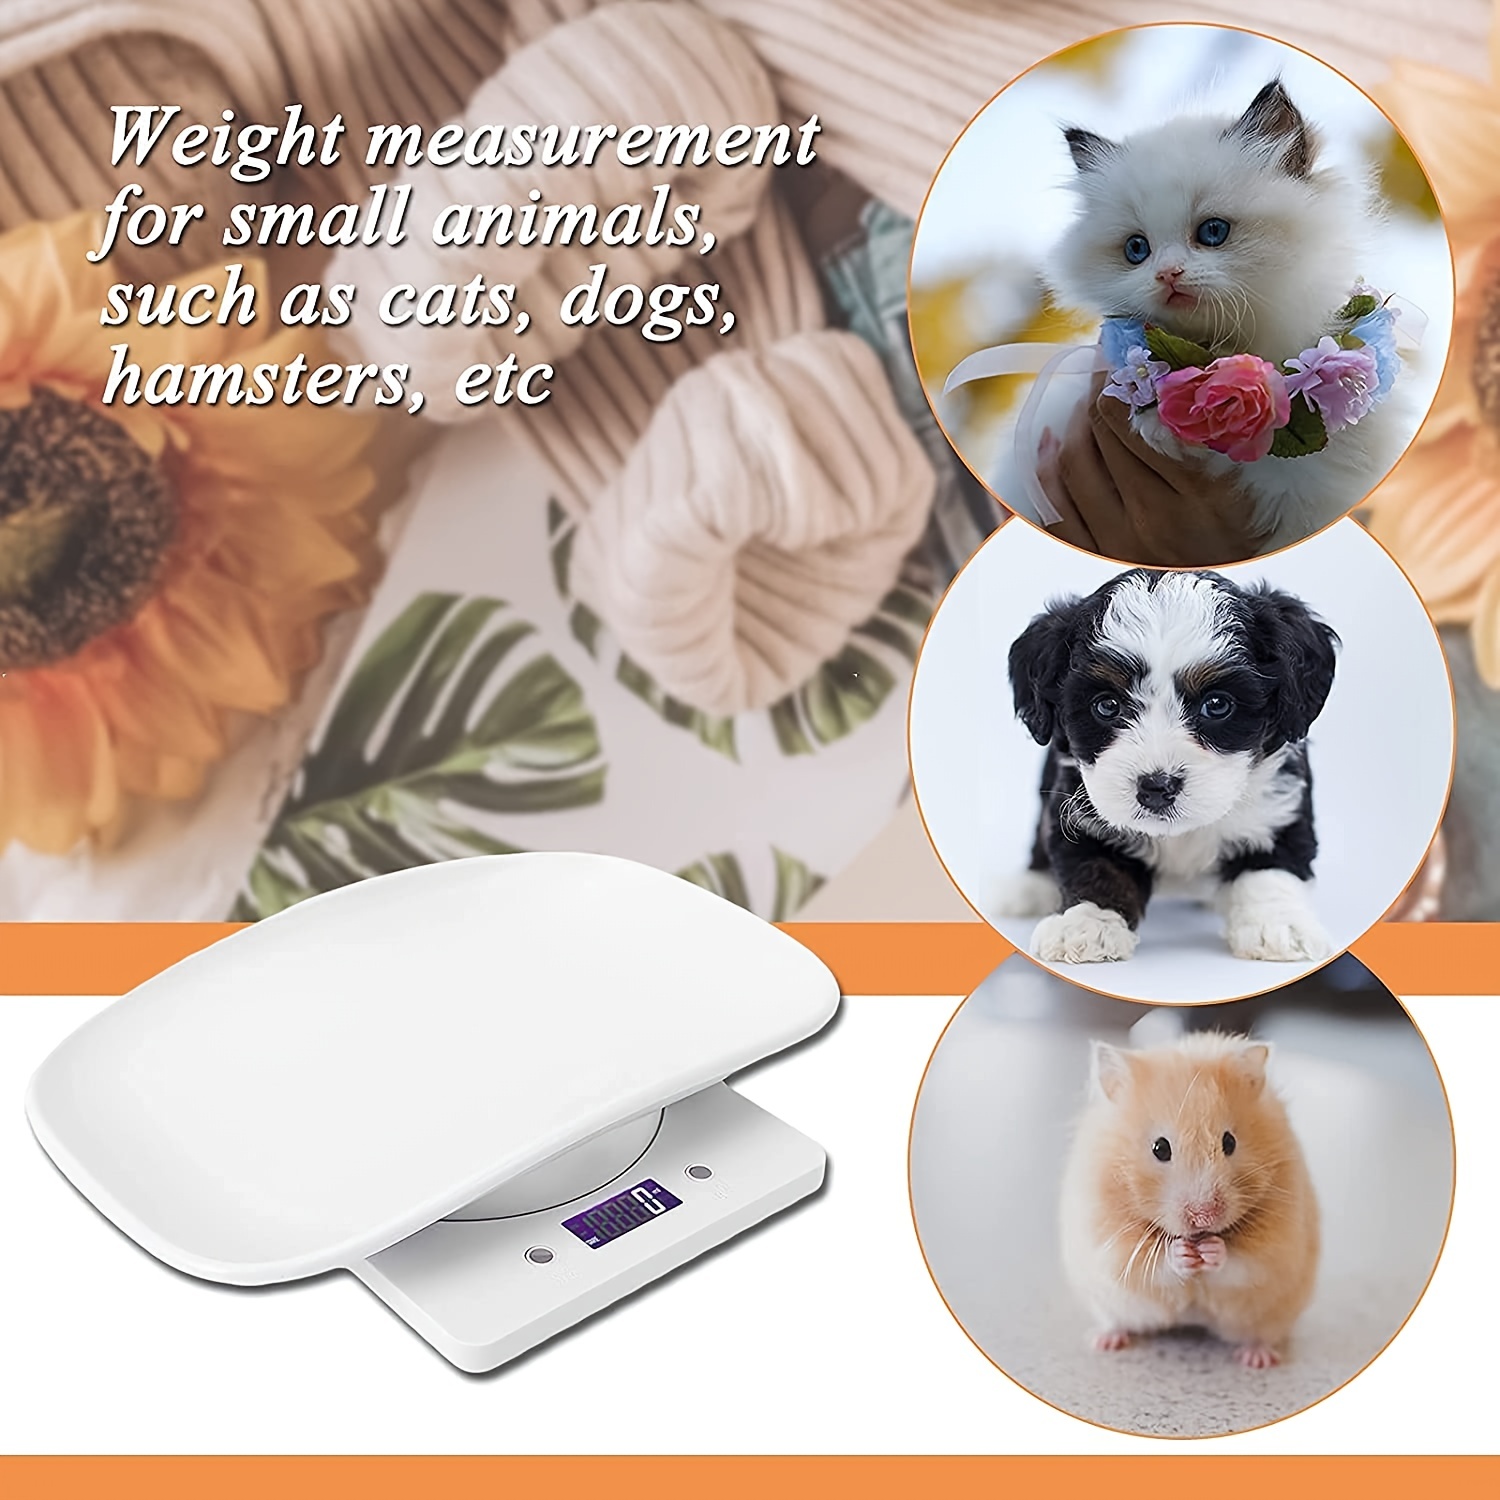 Digital Pet Scale With Lcd Display, 4 Weighting Modes (oz/ml/lb/g) For Pets  And Kitchen